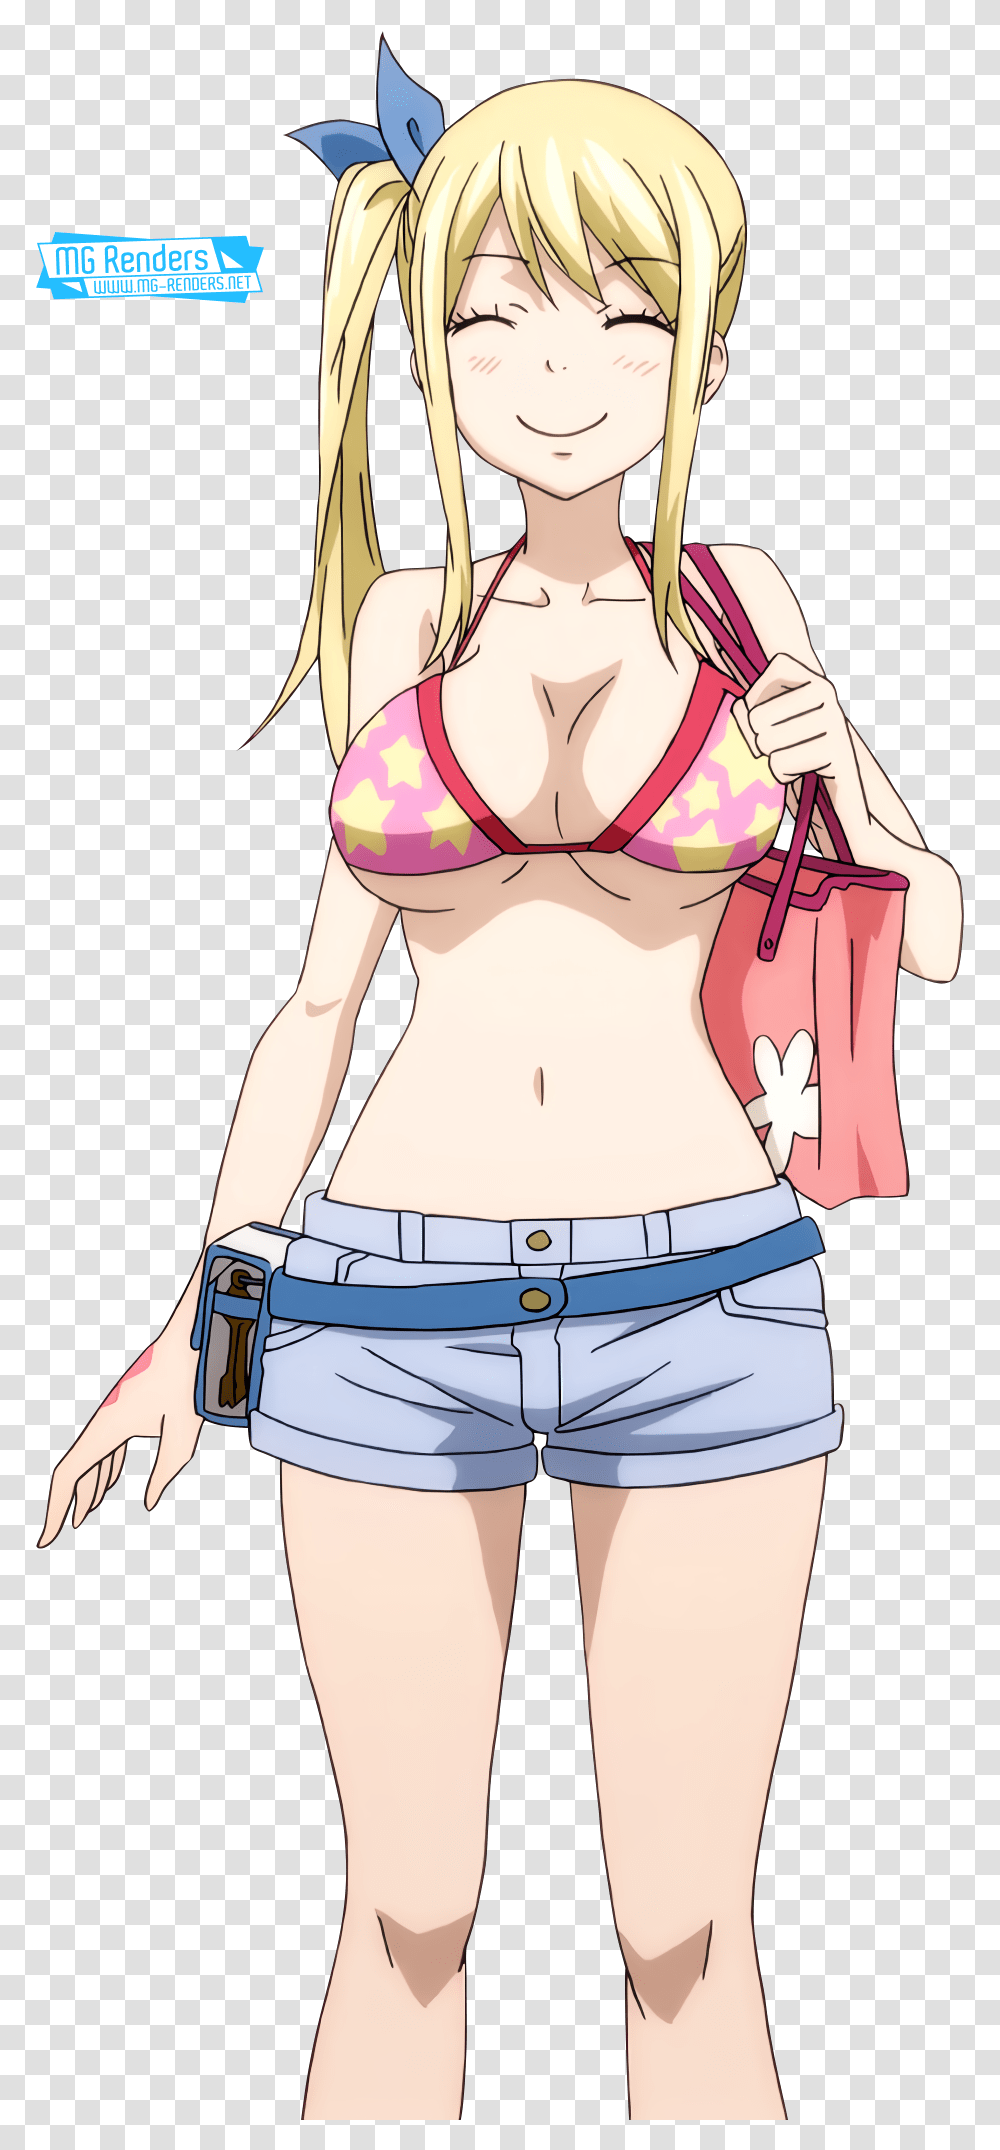 Fairy Tail Lucy Heartfilia Render 61 Anime Image Fairy Tail Lucy Ecchi, Clothing, Shorts, Person, Manga Transparent Png